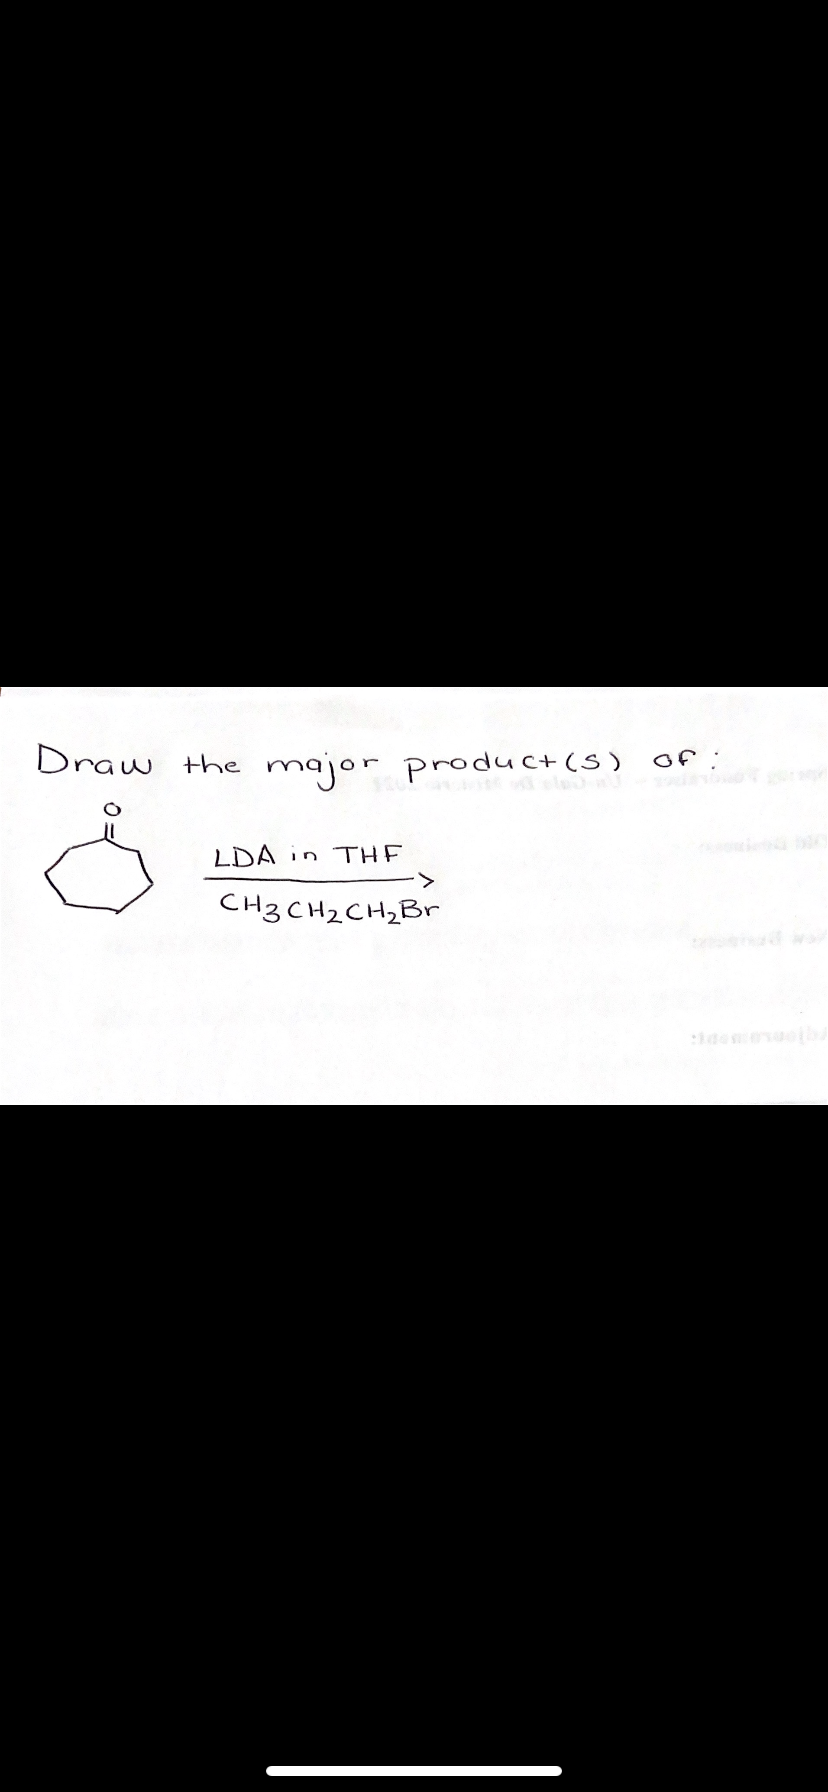 Draw the major product(s)
Of
LDA in THE
CH3 CH2CH2Br
